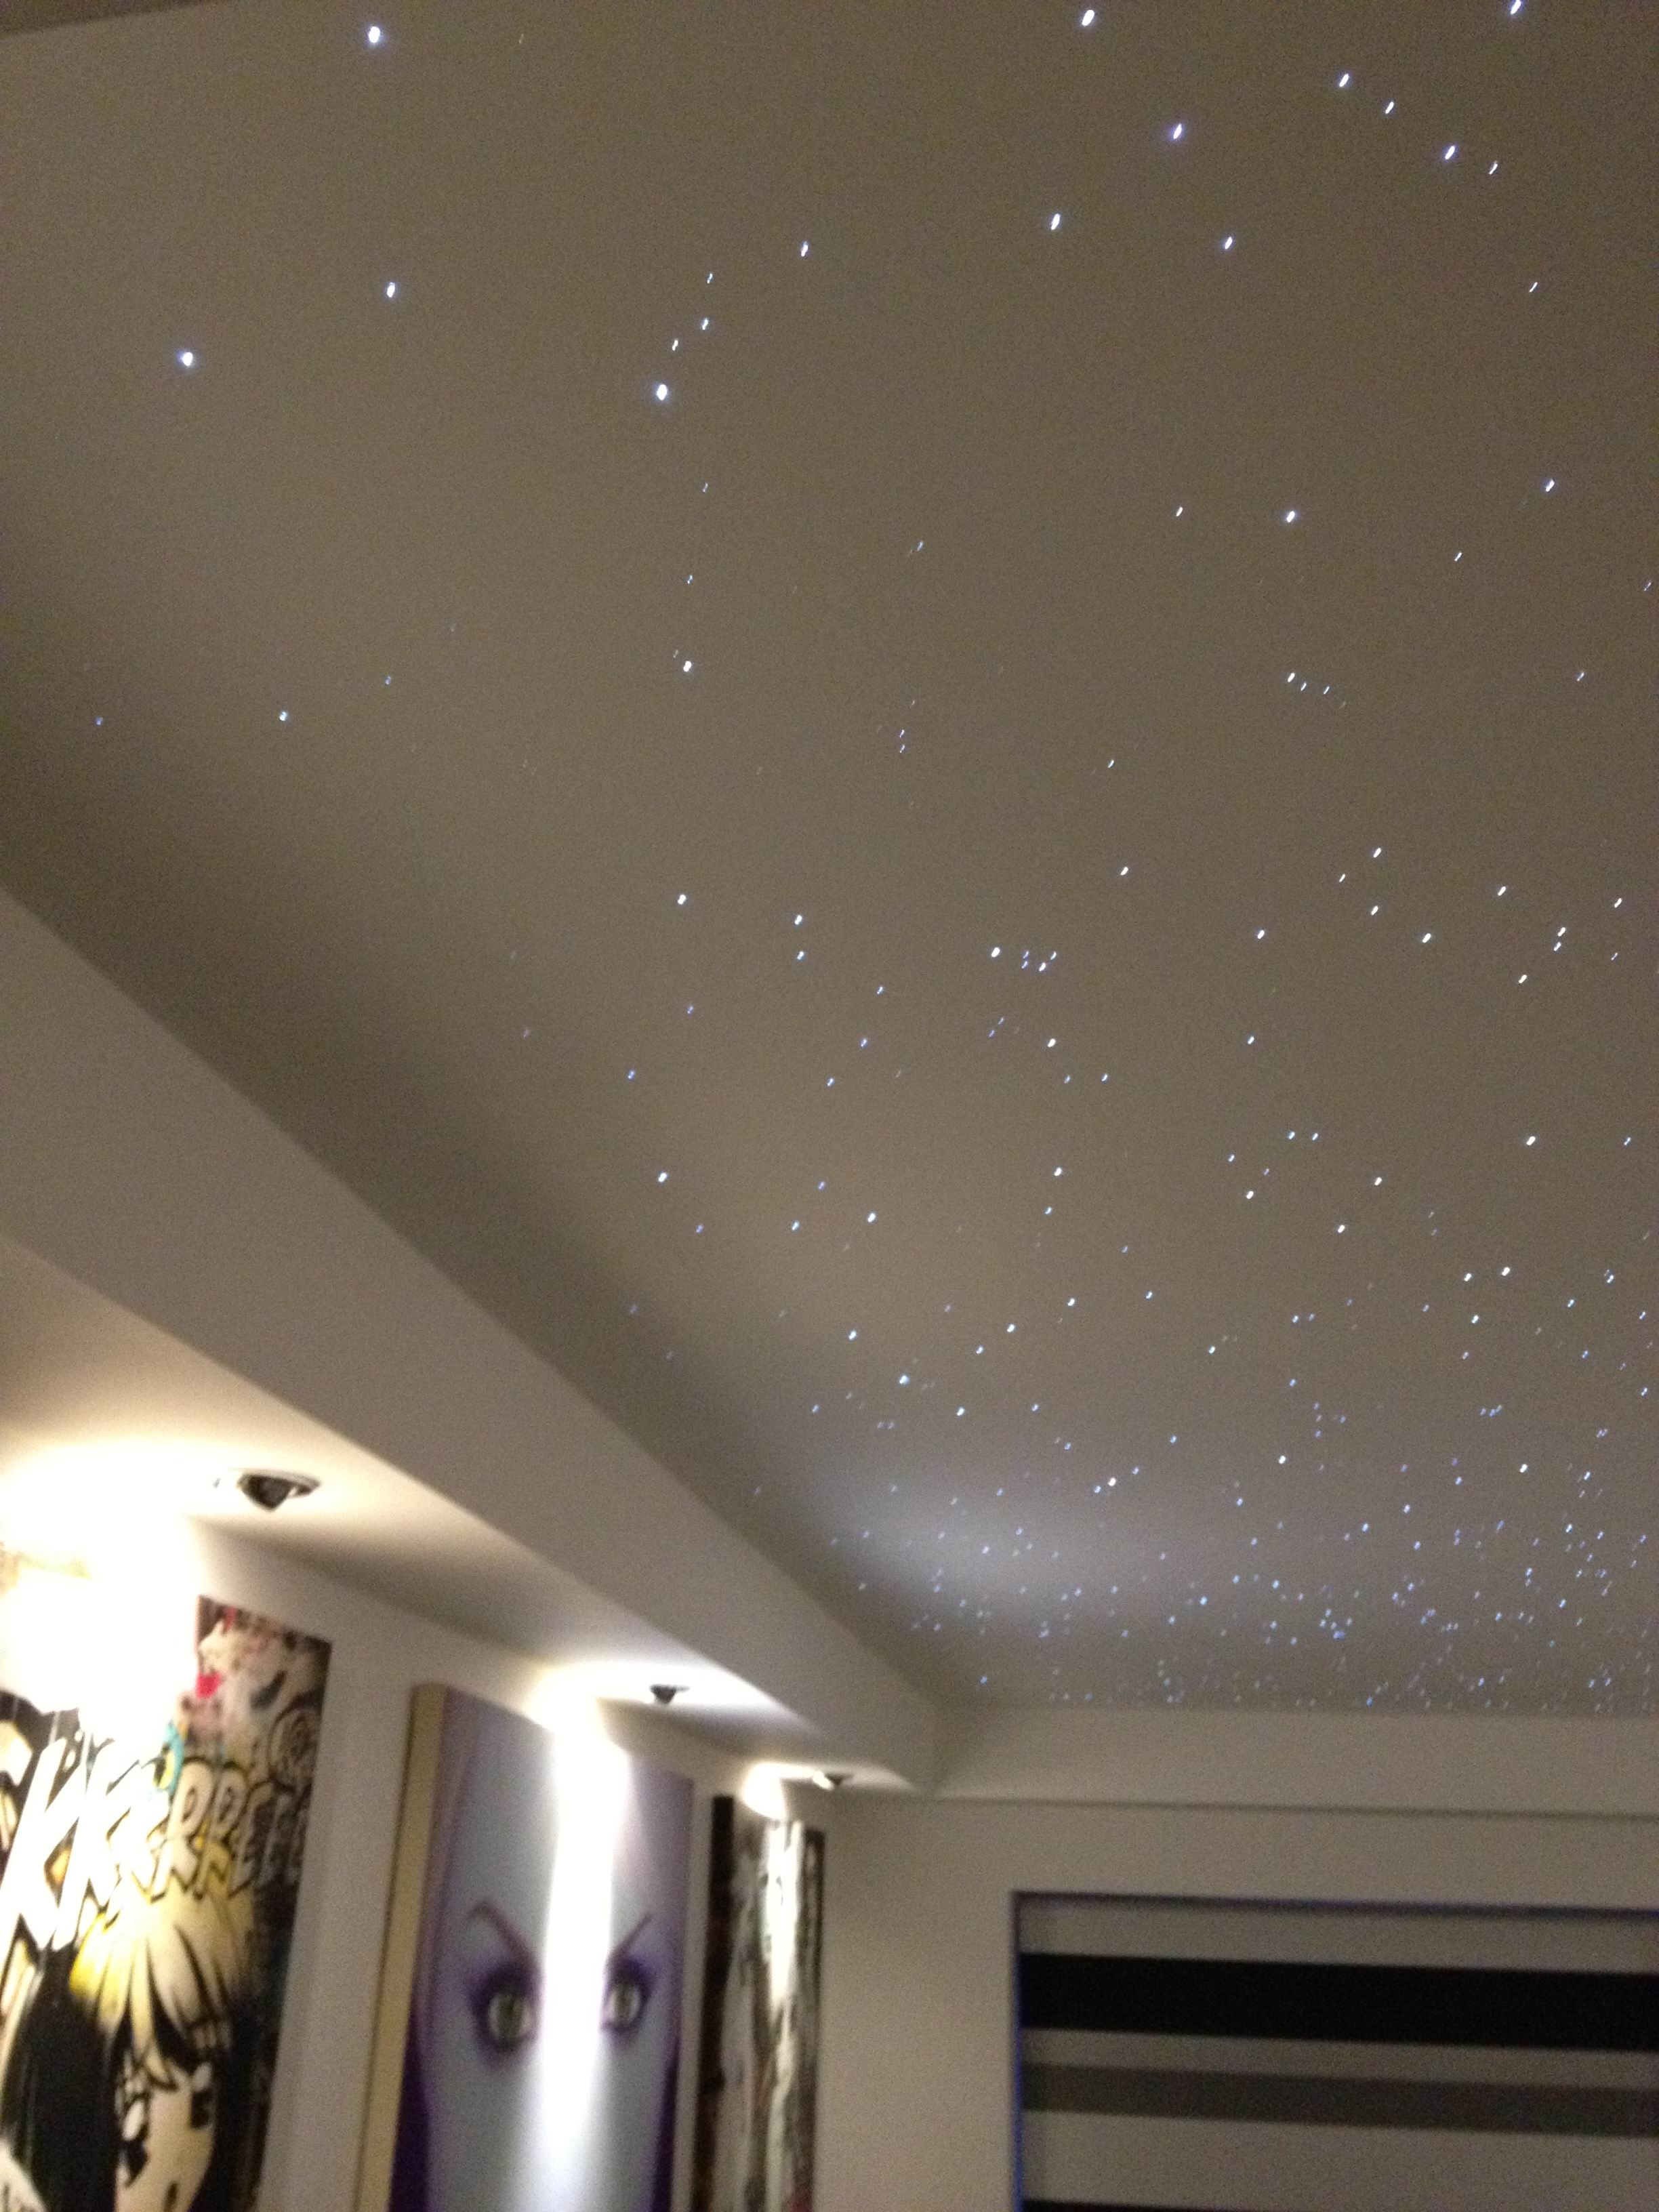 Permalink to Stars On Ceiling Lights Project